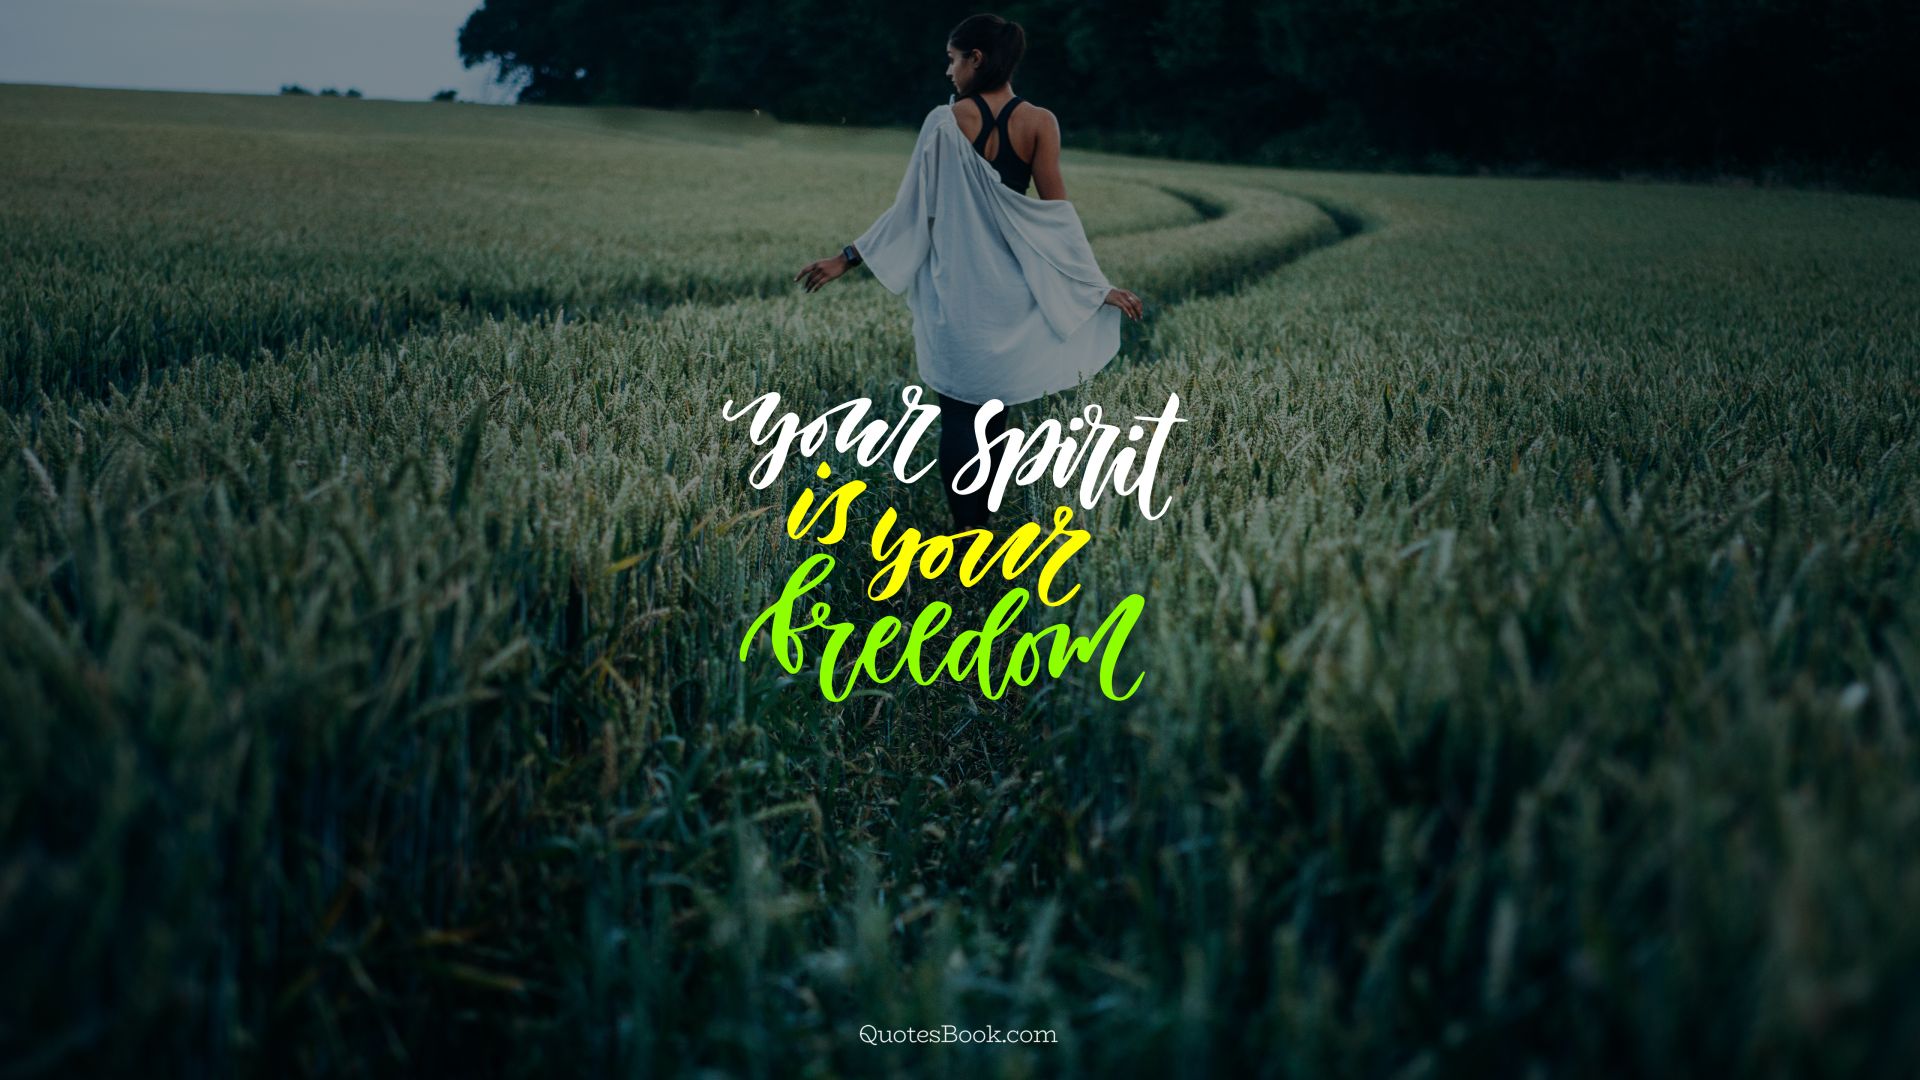 Your spirit is your freedom